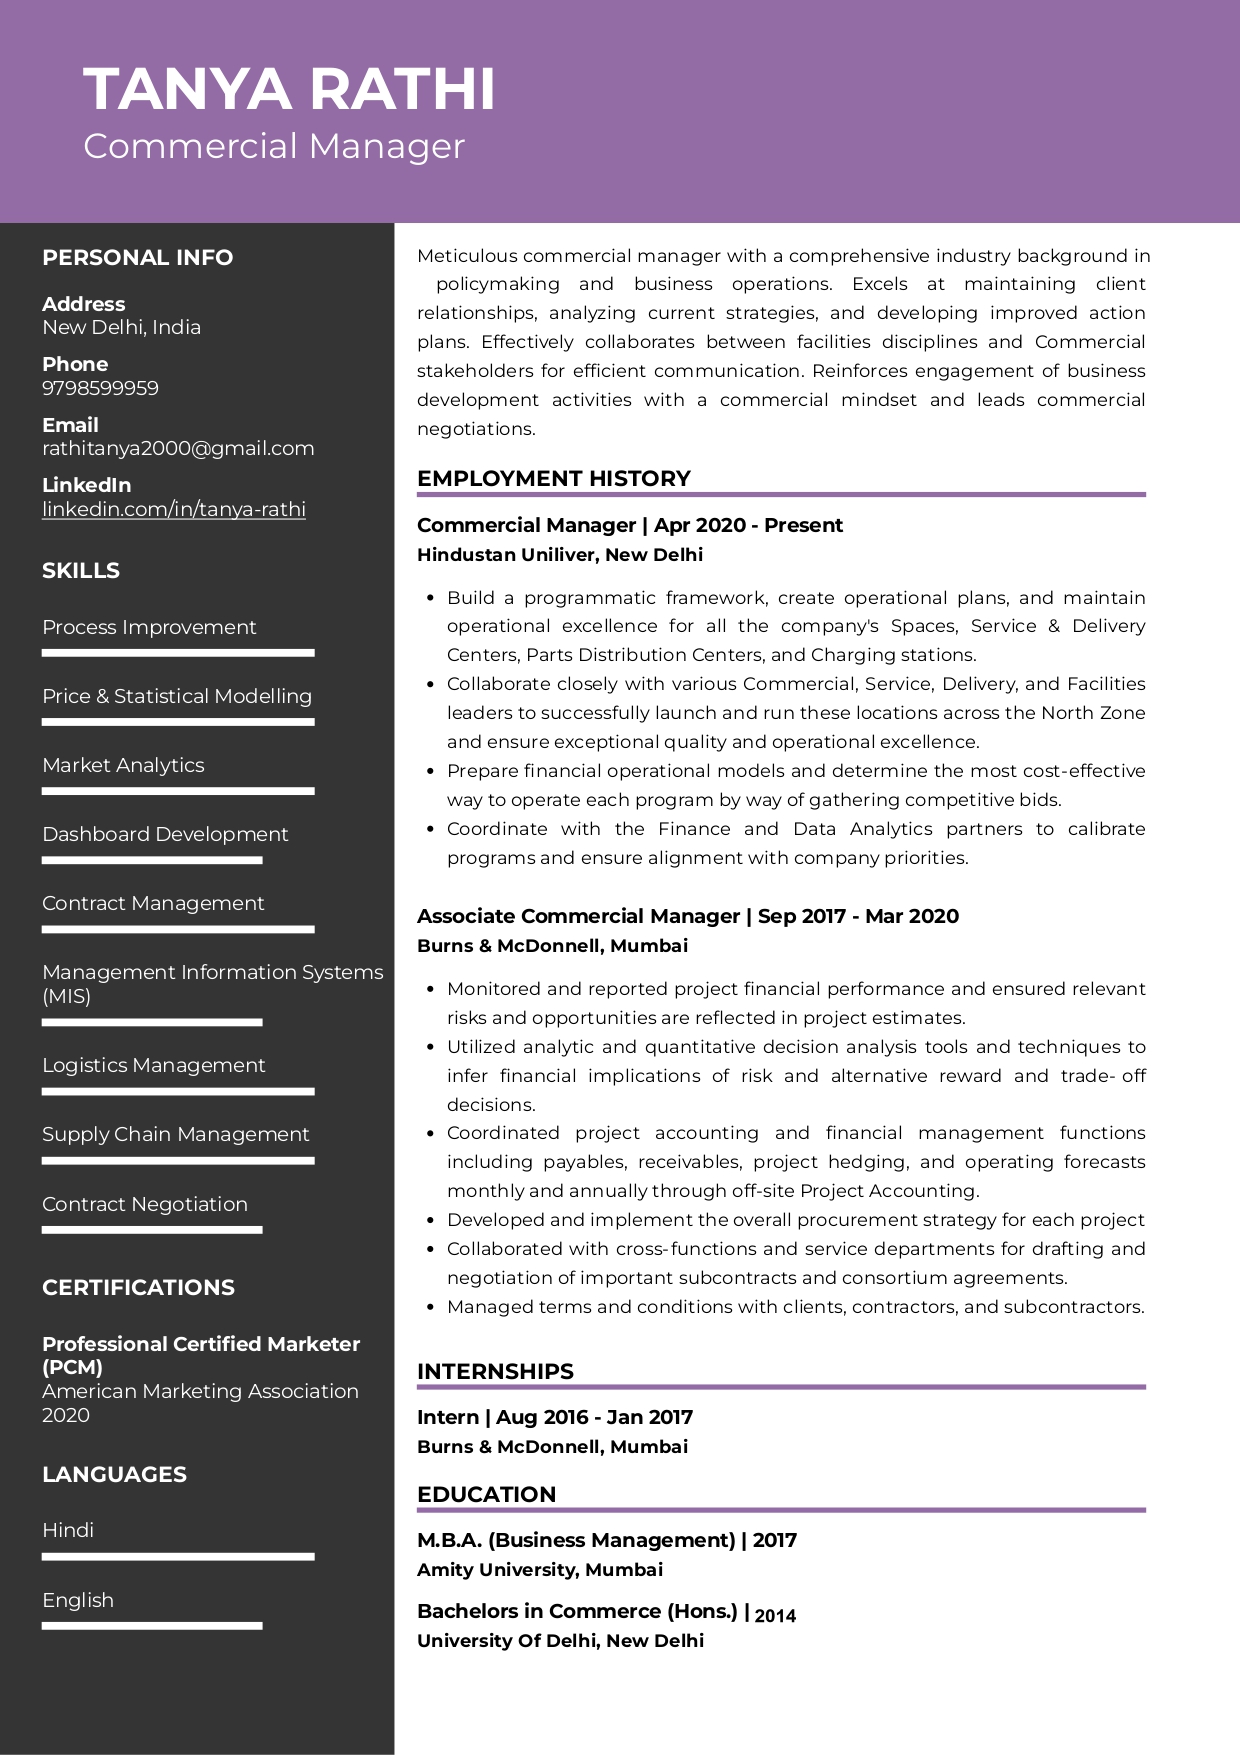 Sample Resume of Commercial Manager | Free Resume Templates & Samples on Resumod.co